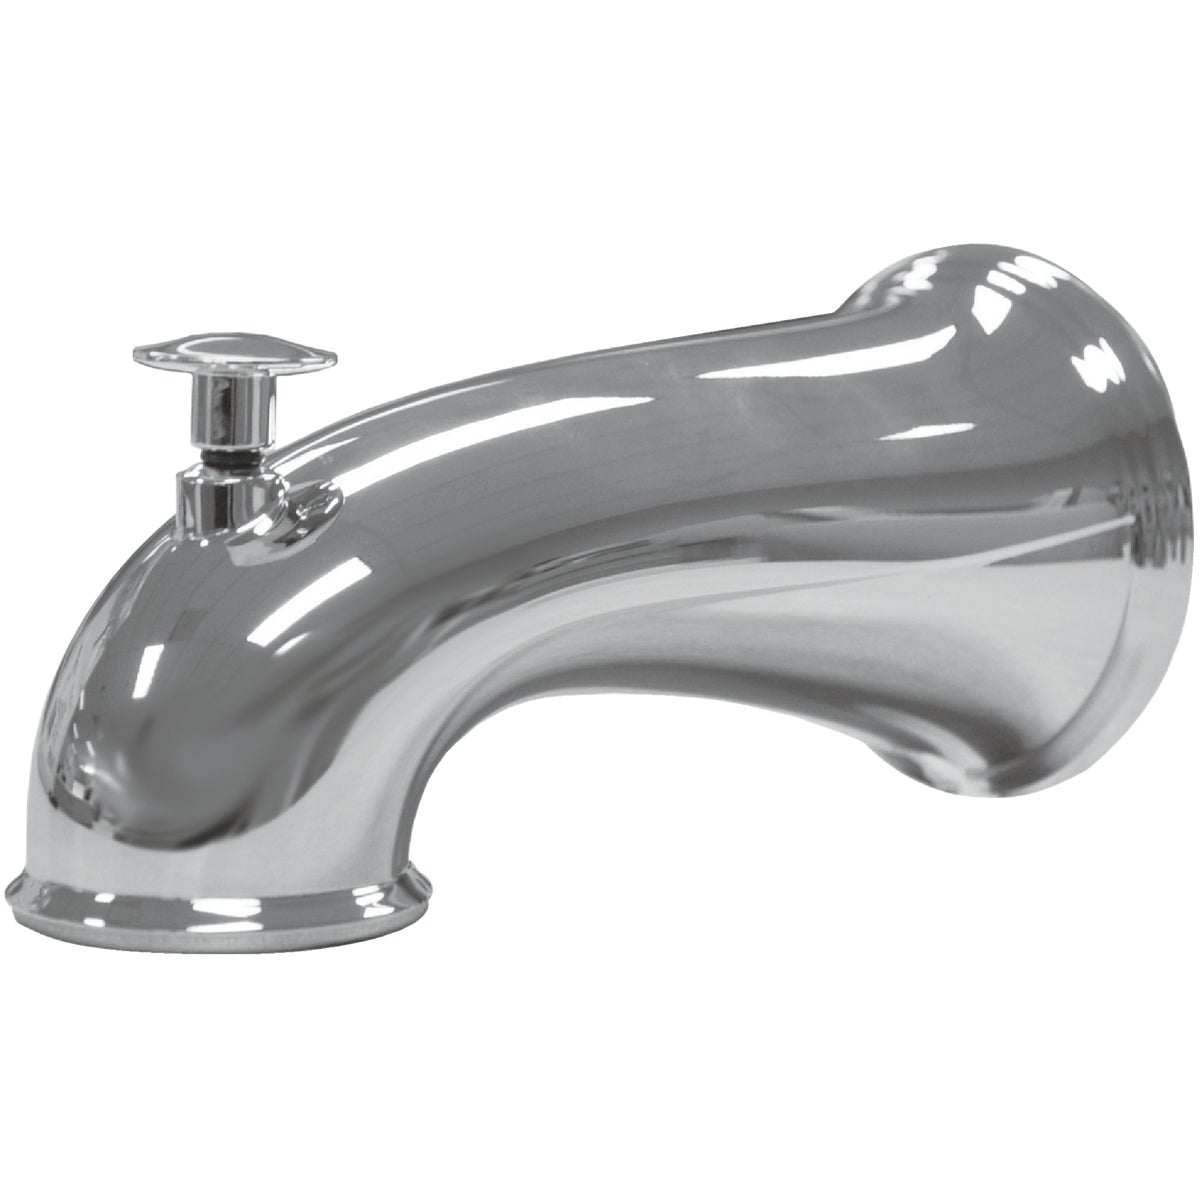 Item 403660, Update your bathroom with the DANCO Tub Spout with Diverter in Chrome.